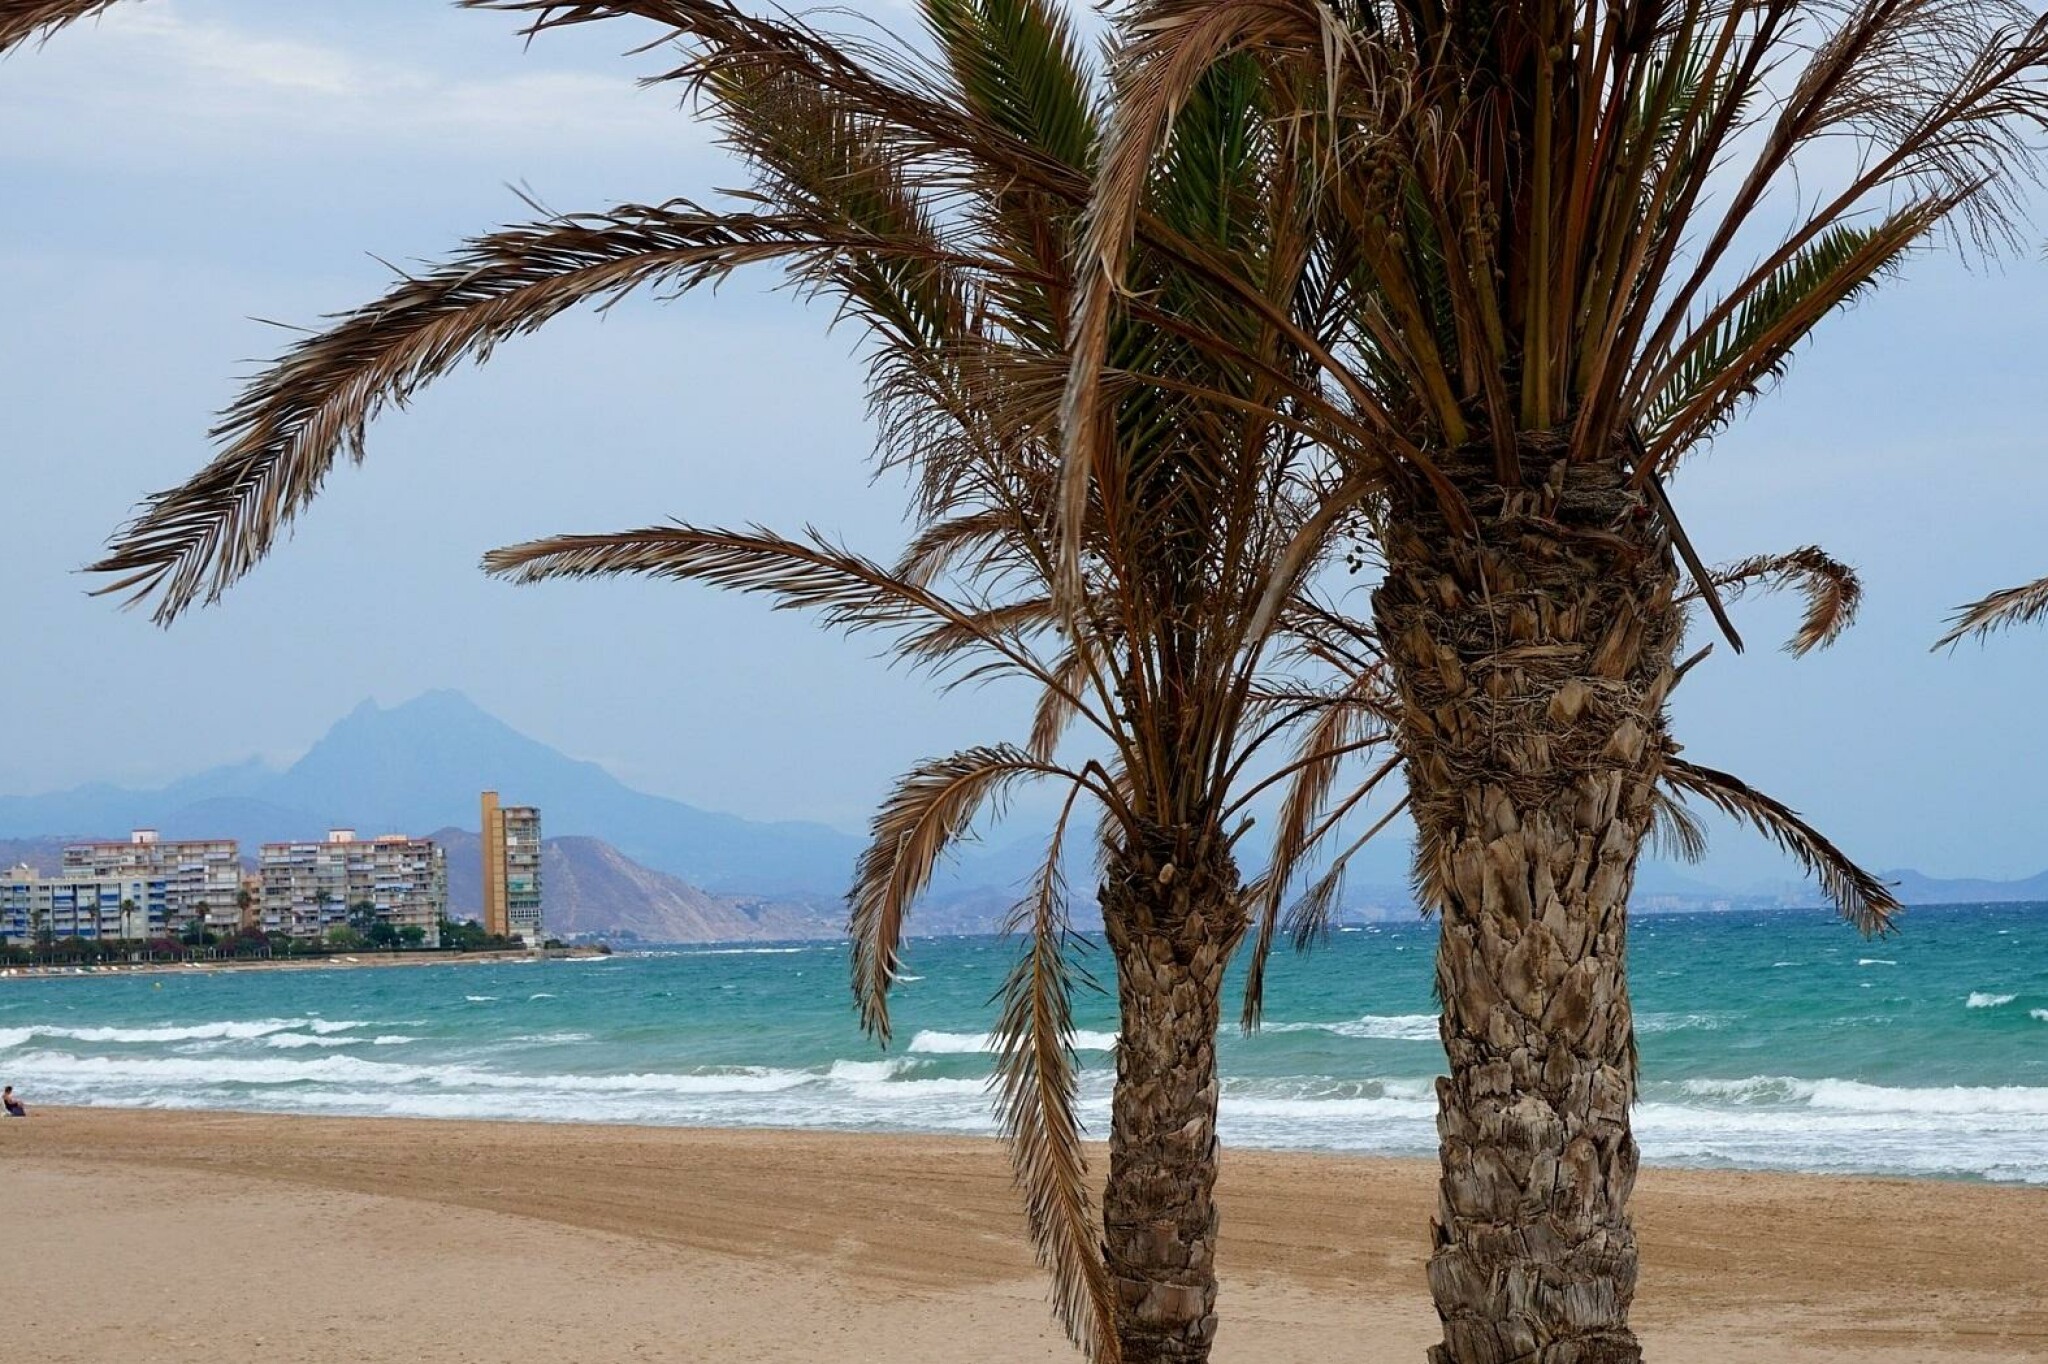 English people love Alicante - discover this province